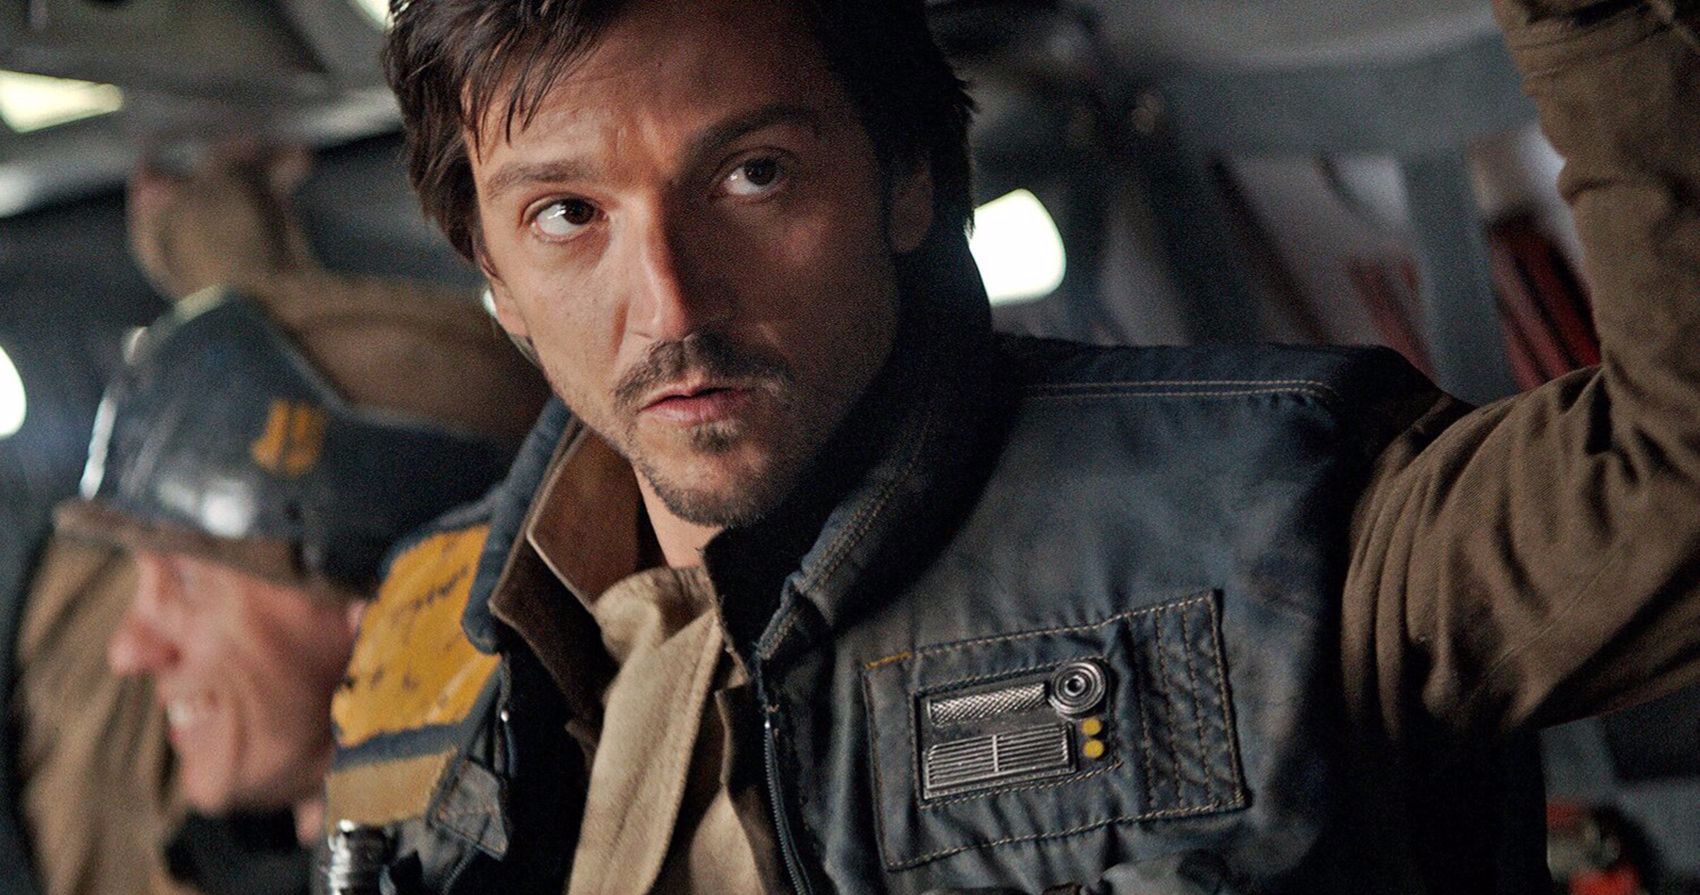 Cassian Andor Rogue One Prequel Series Begins Shooting This Year for Disney+